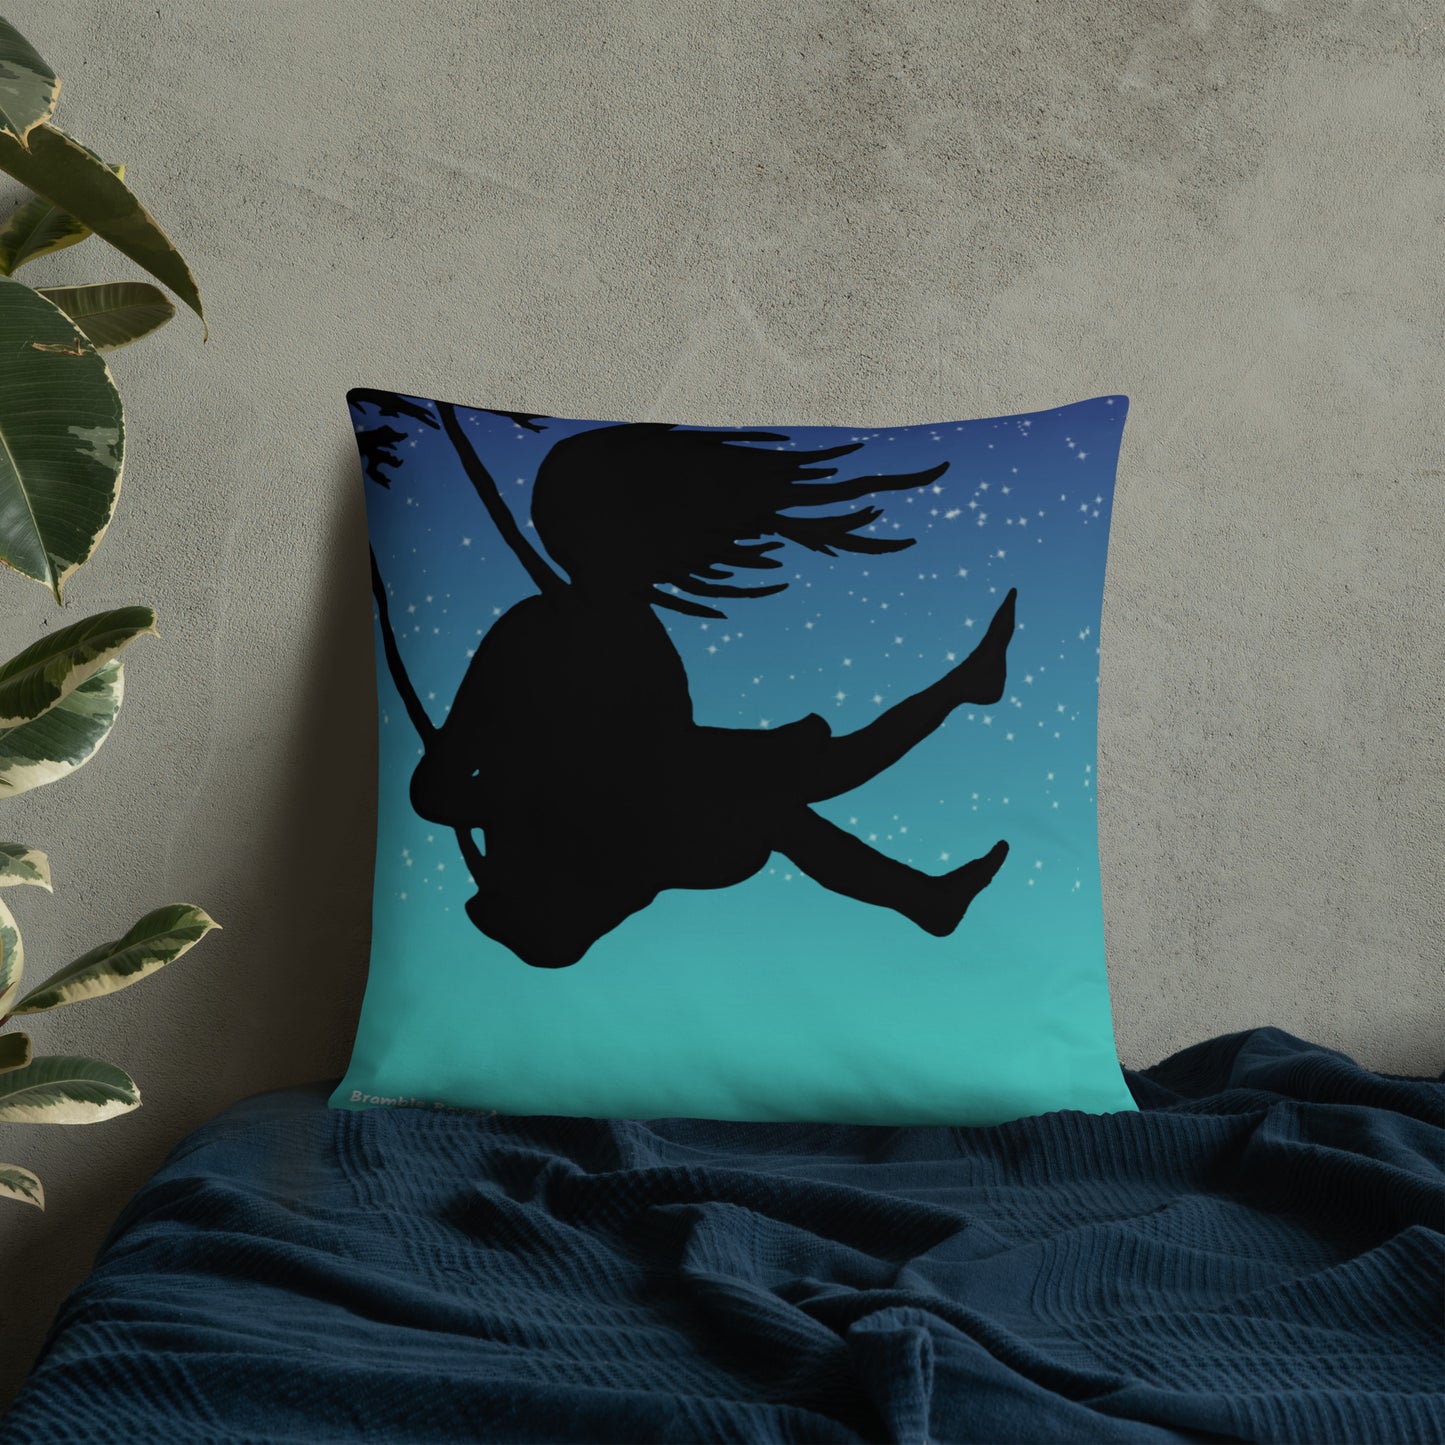 Original Swing Free design of a girl's silhouette in a tree swing against the backdrop of a blue starry sky. Rectangular image on front of pillow with blue background fabric. Pillow has design on both sides. 22 by 22 inch accent pillow. Enlarged back image shown on blue bedding.